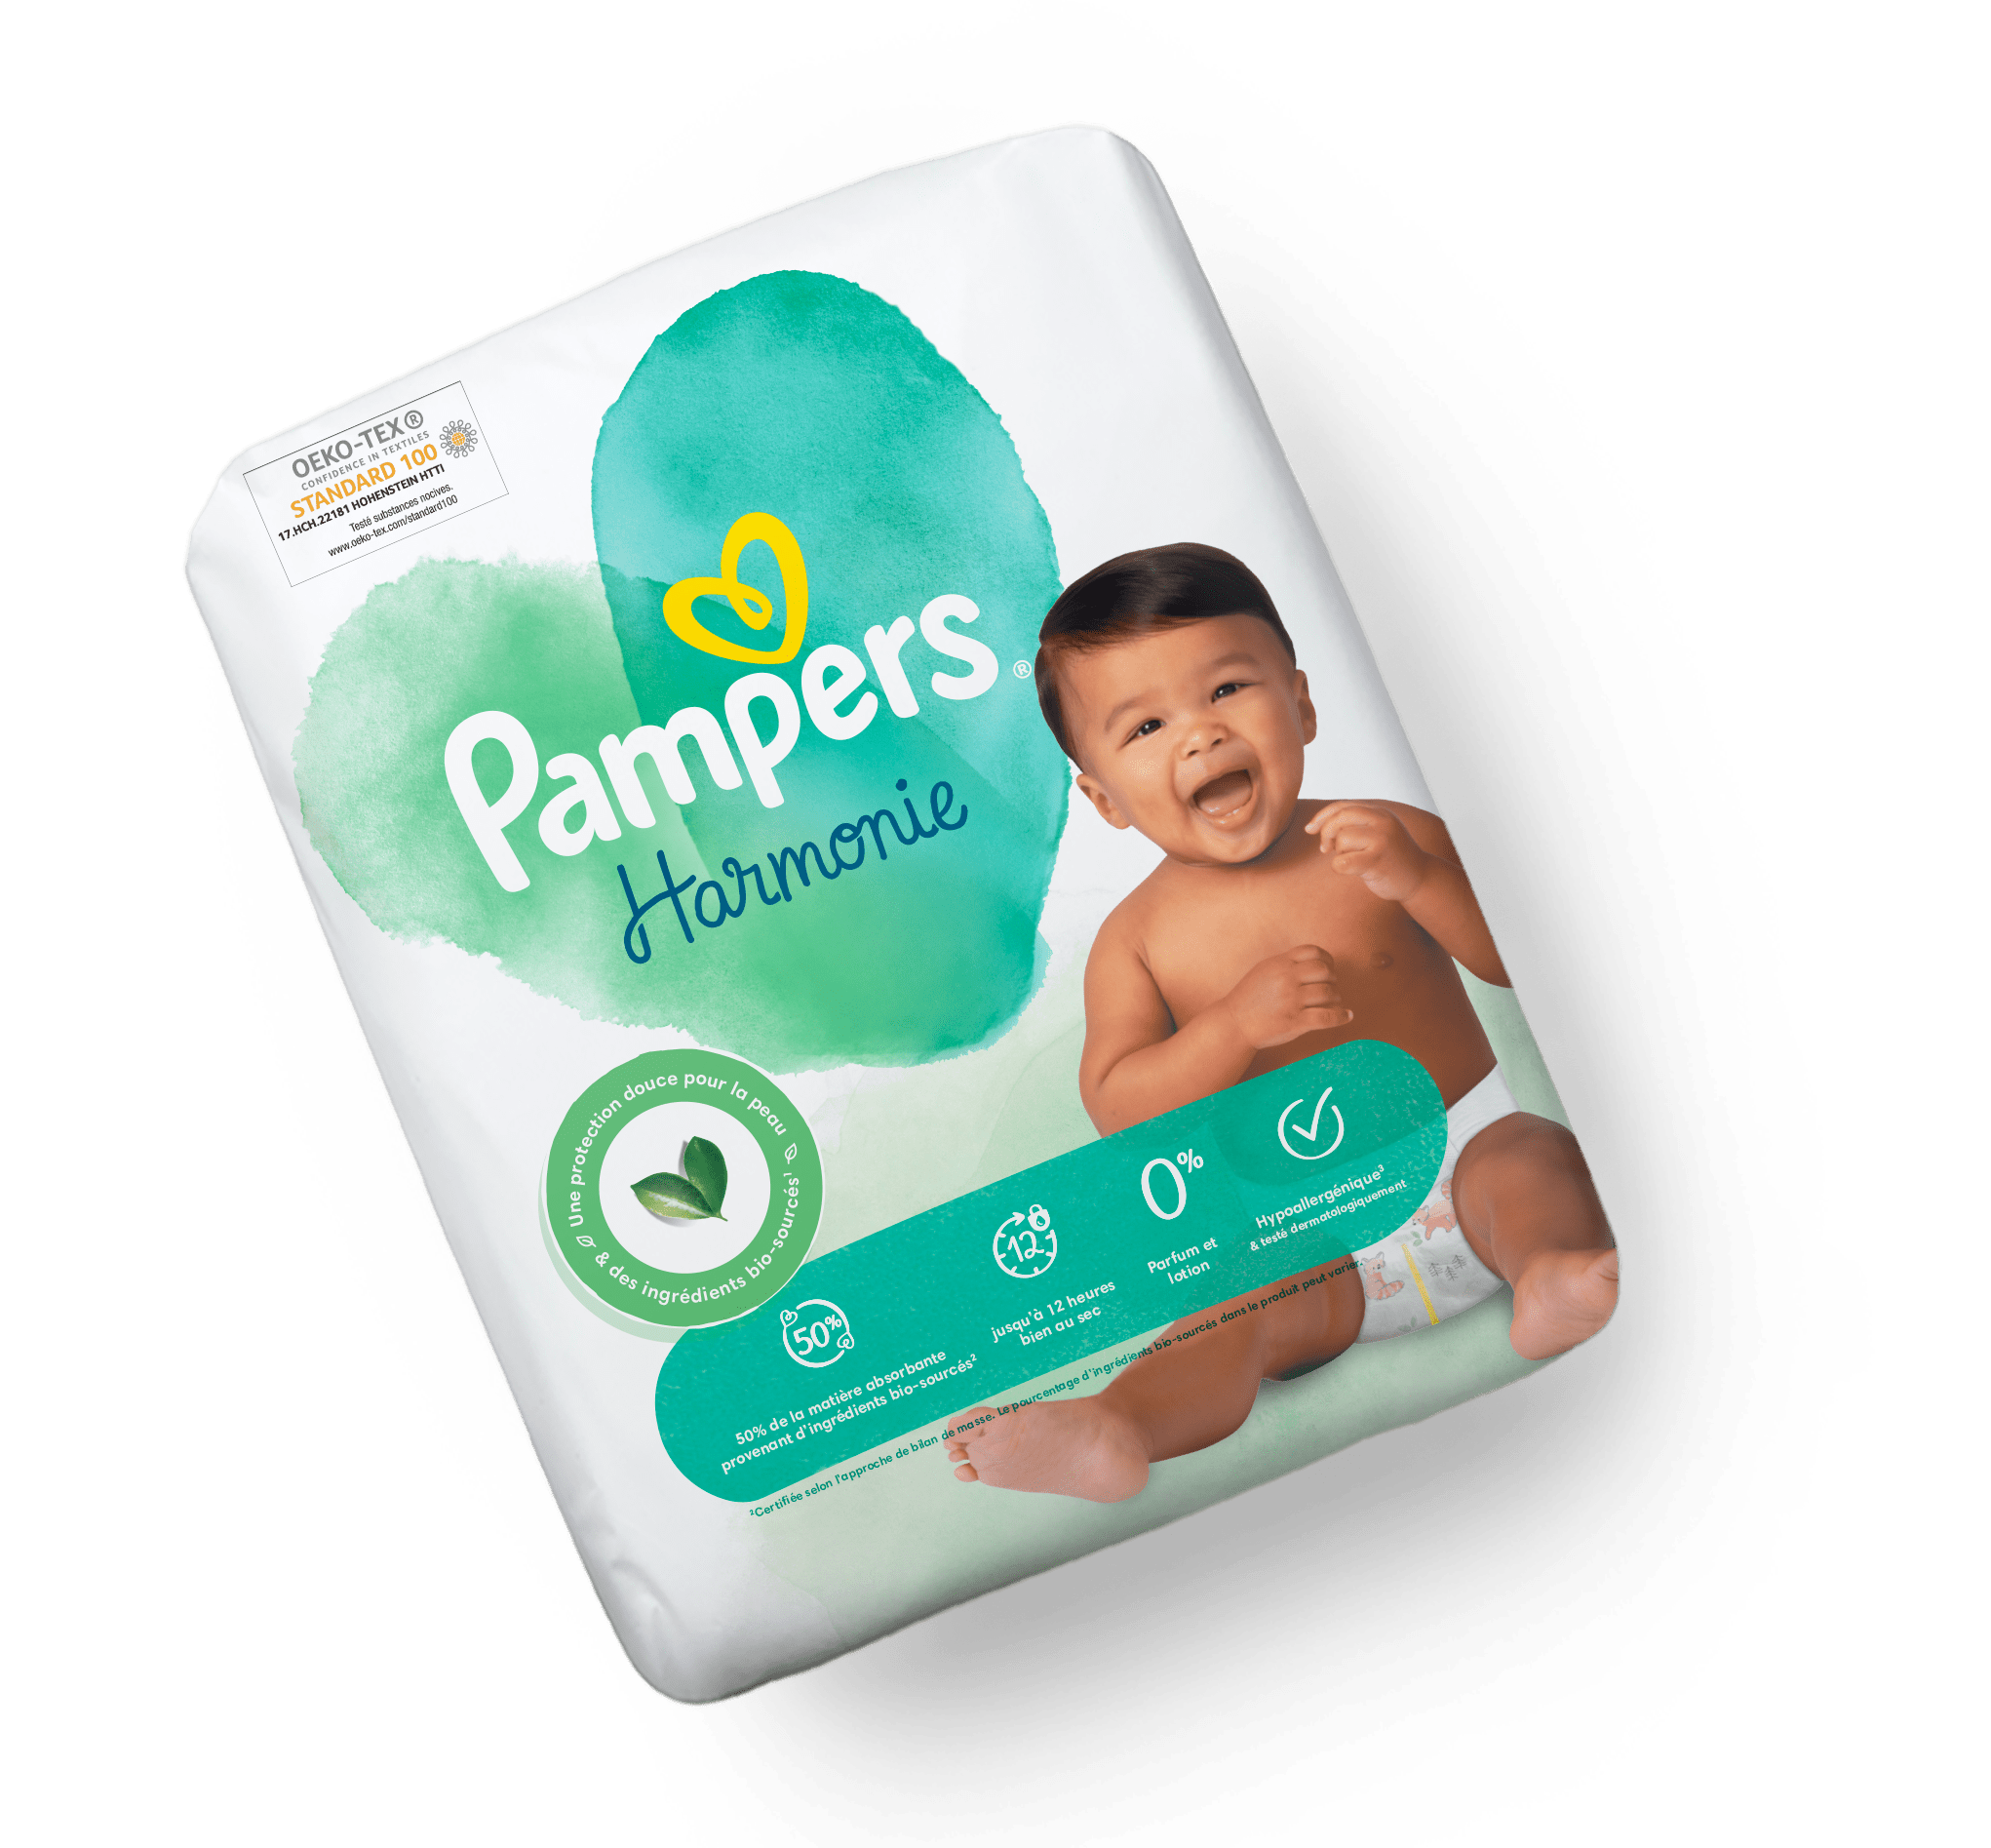 Pampers Harmonie 24 Couches Taille 1 - Protection 12h Bio-Sourcé - Pharma360